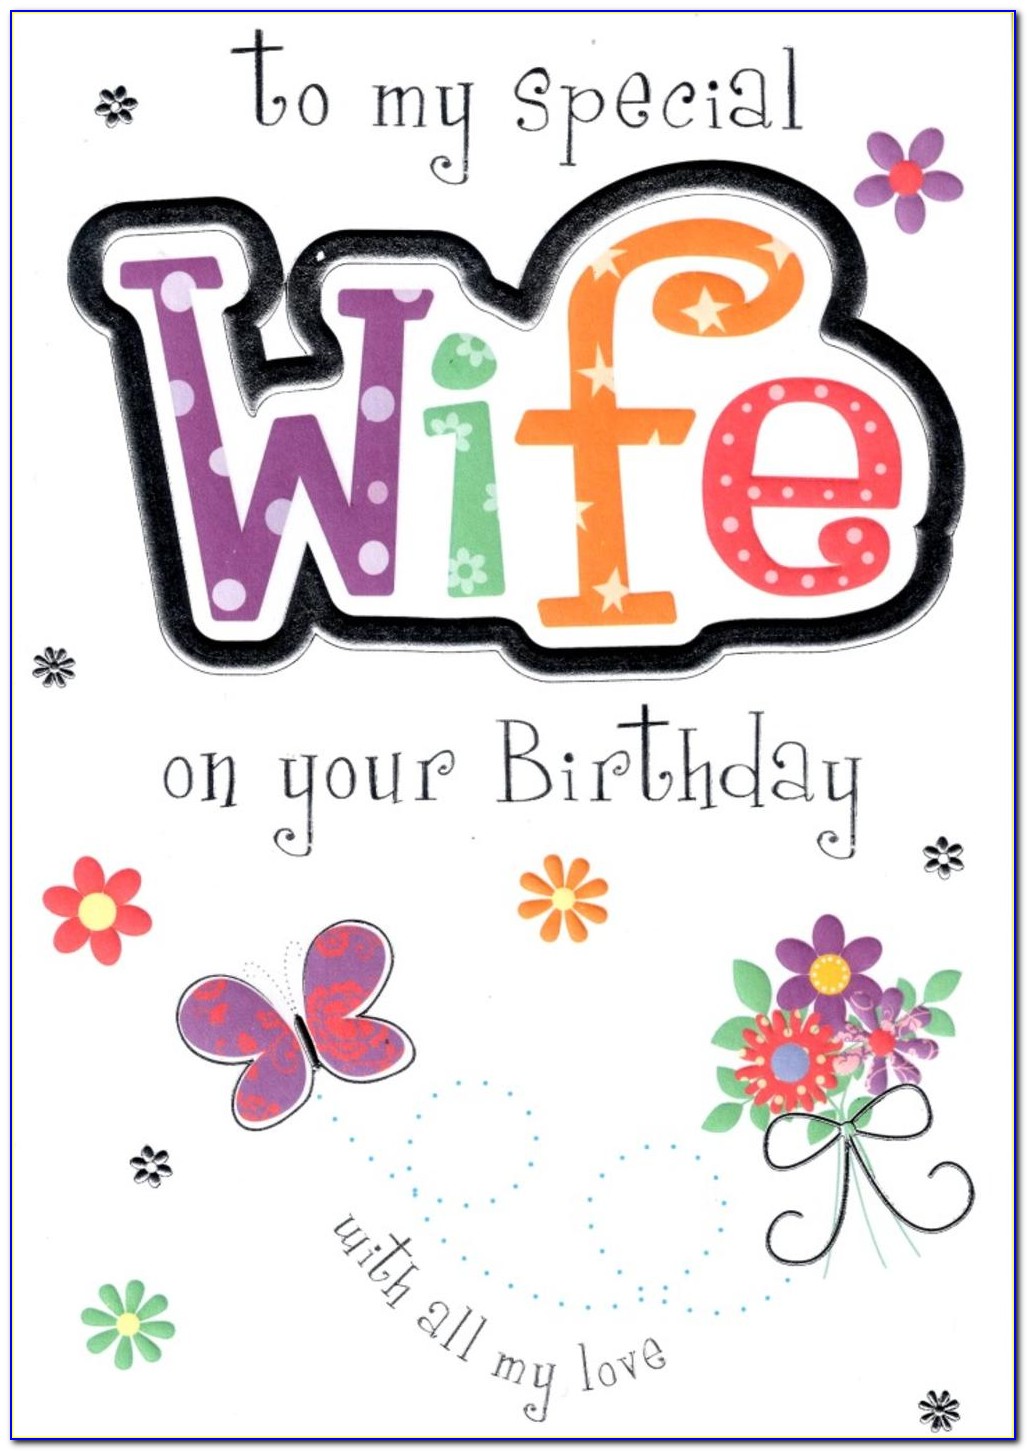 Free Printable Romantic Birthday Cards For Wife